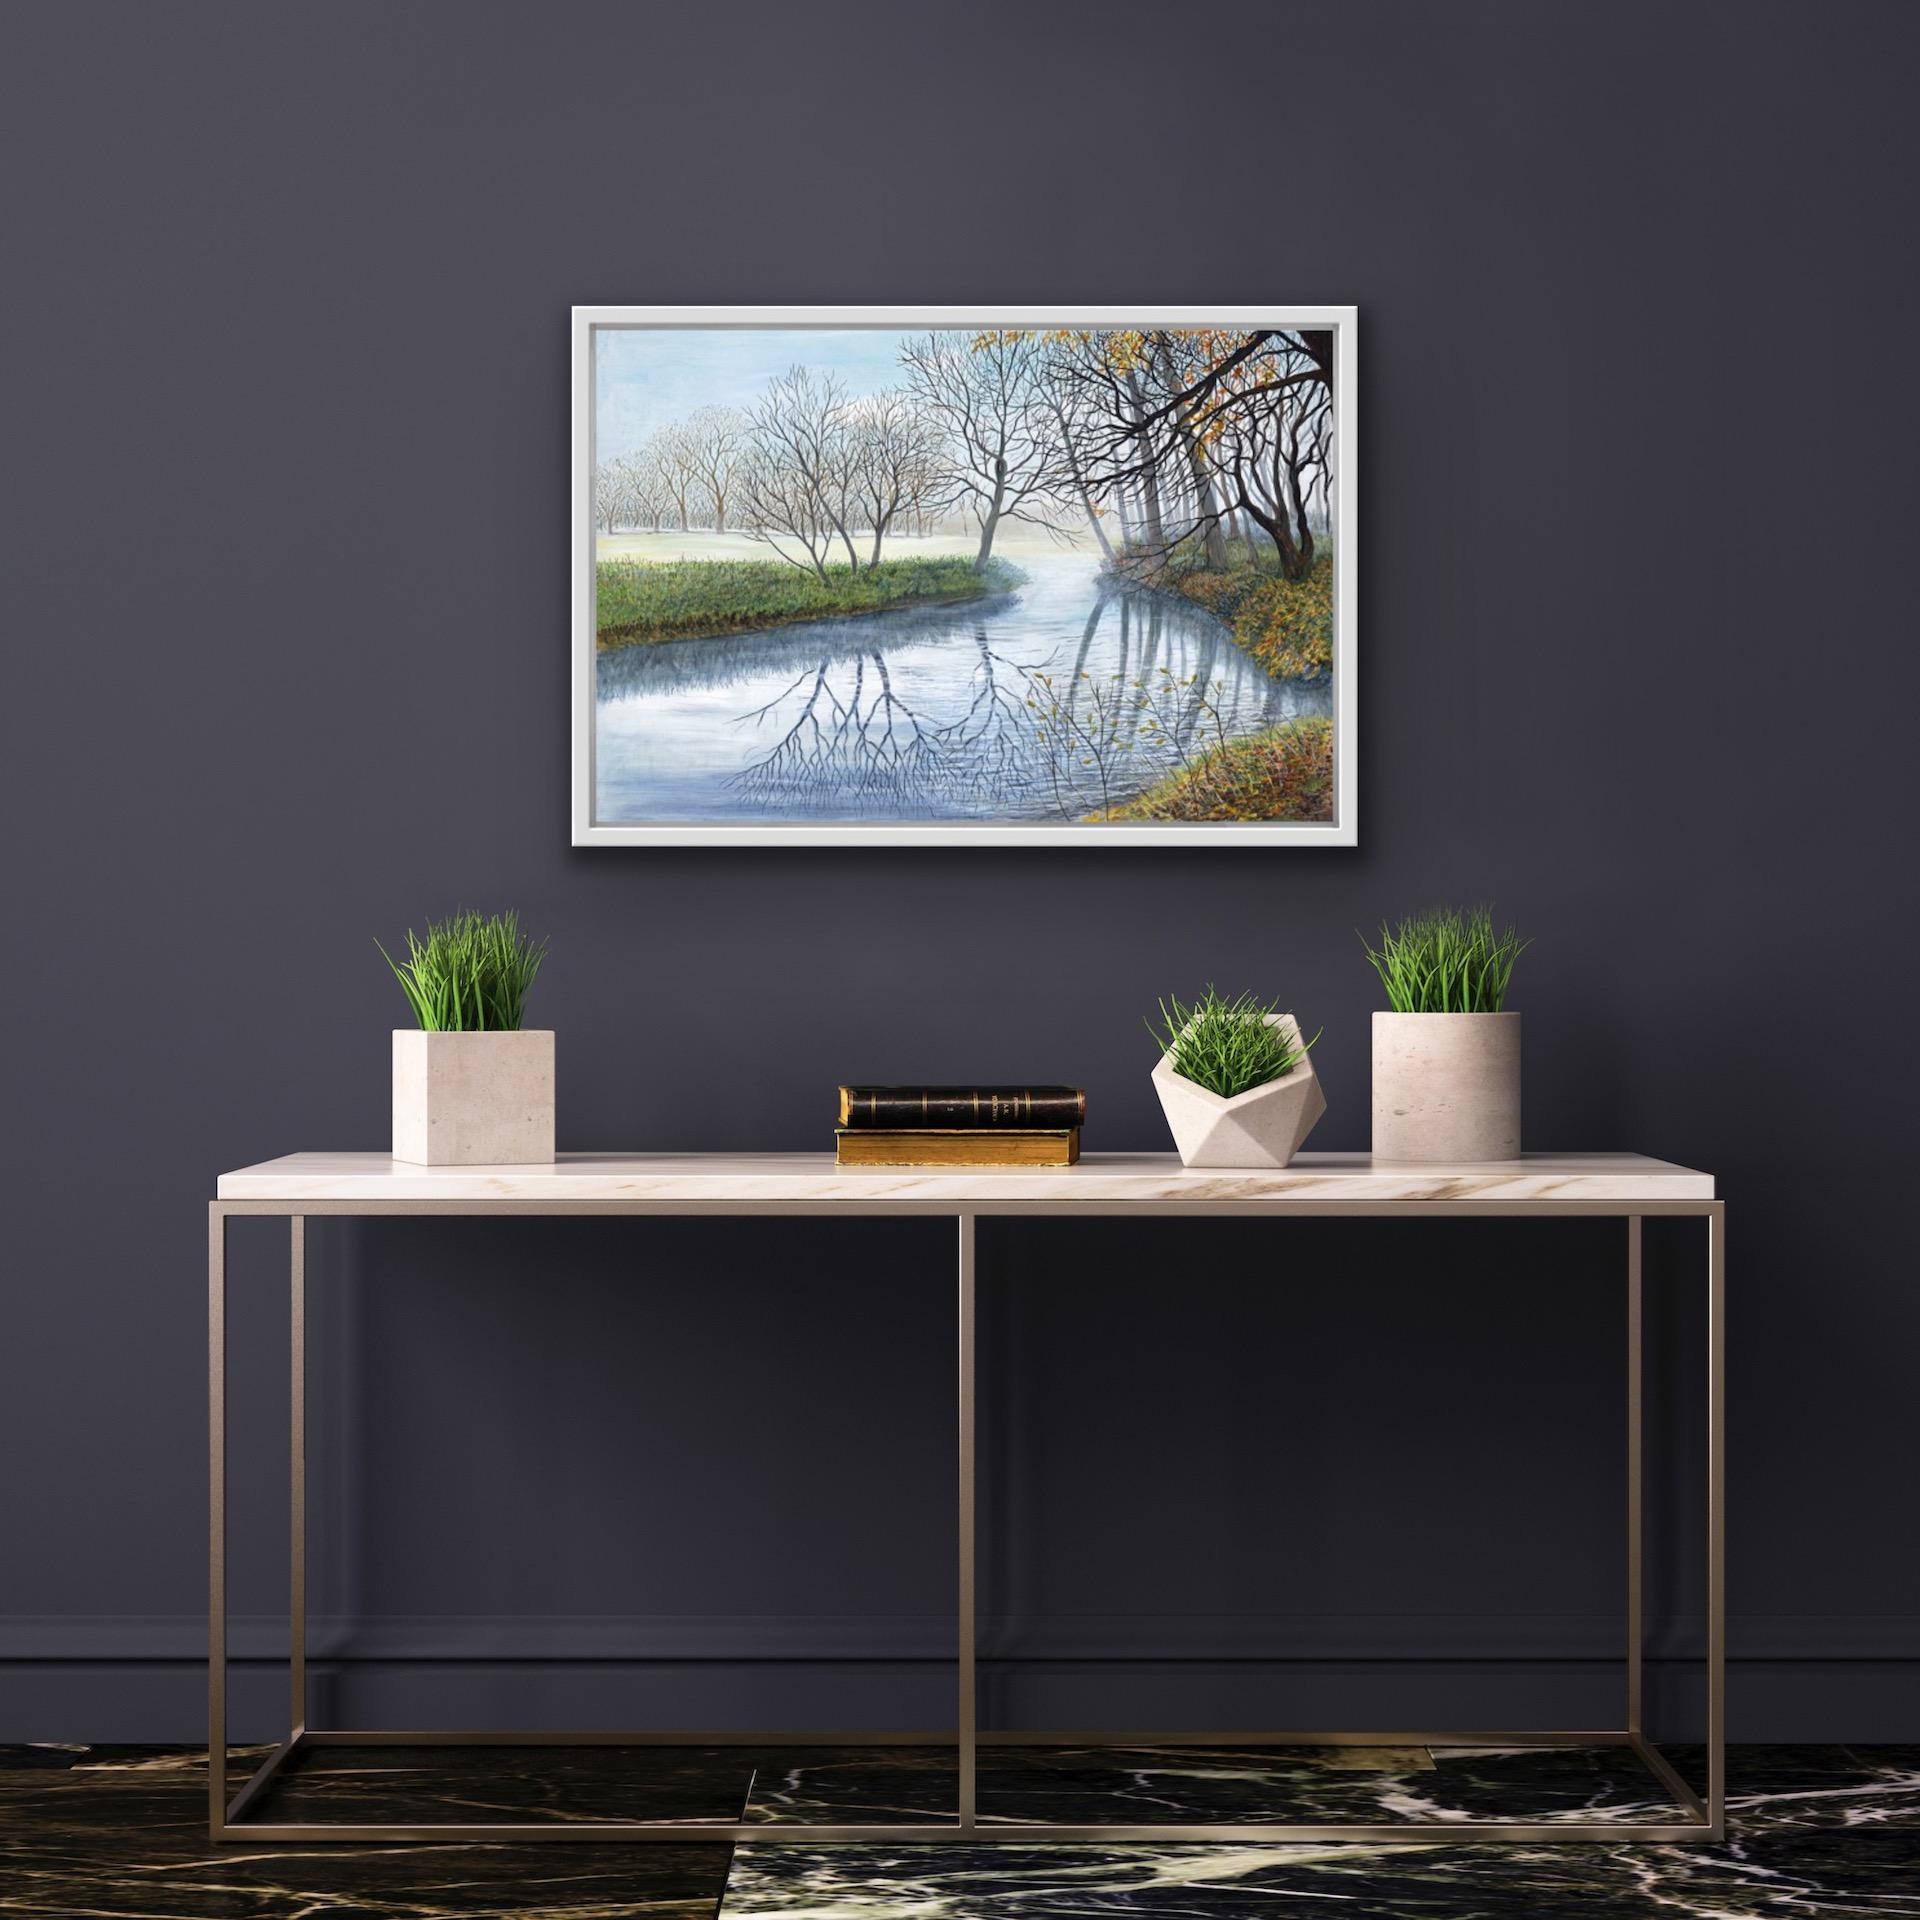 Mist on the River [2021]
Original
Landscape
Acrylic
Canvas Size: H:51 cm x W:76 cm x D:2cm
Sold Unframed
Please note that insitu images are purely an indication of how a piece may look

On a walk by the river on a beautiful crisp winter's day I was